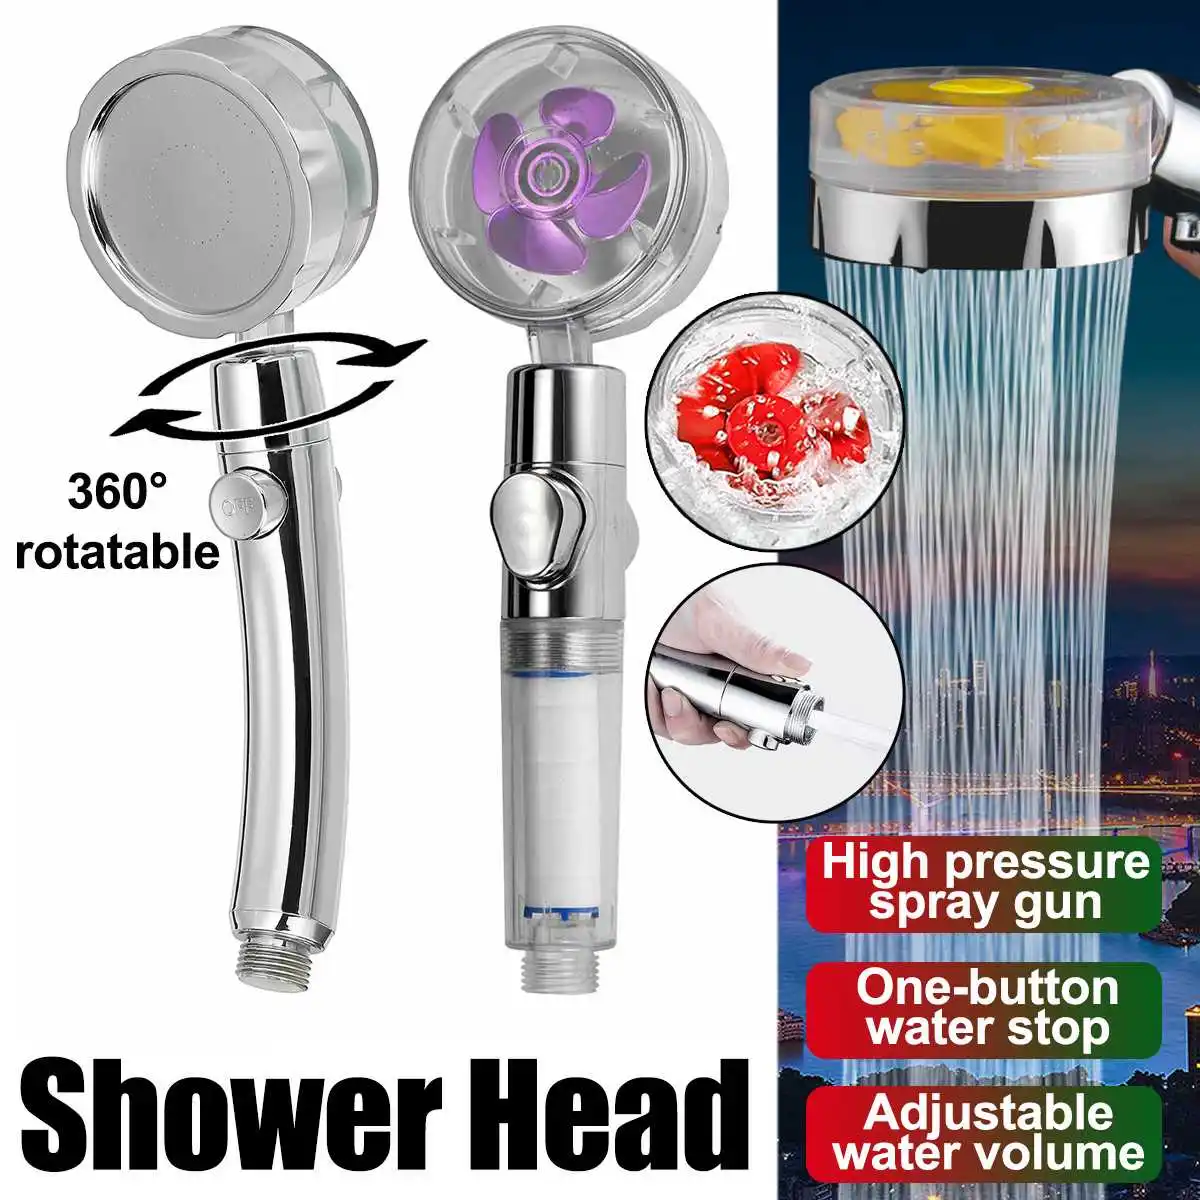 

Shower Head Water Saving Flow 360 Degrees Rotating with Small Fan ABS Rainfall Strong Pressurization Spray Nozzle Bathroom